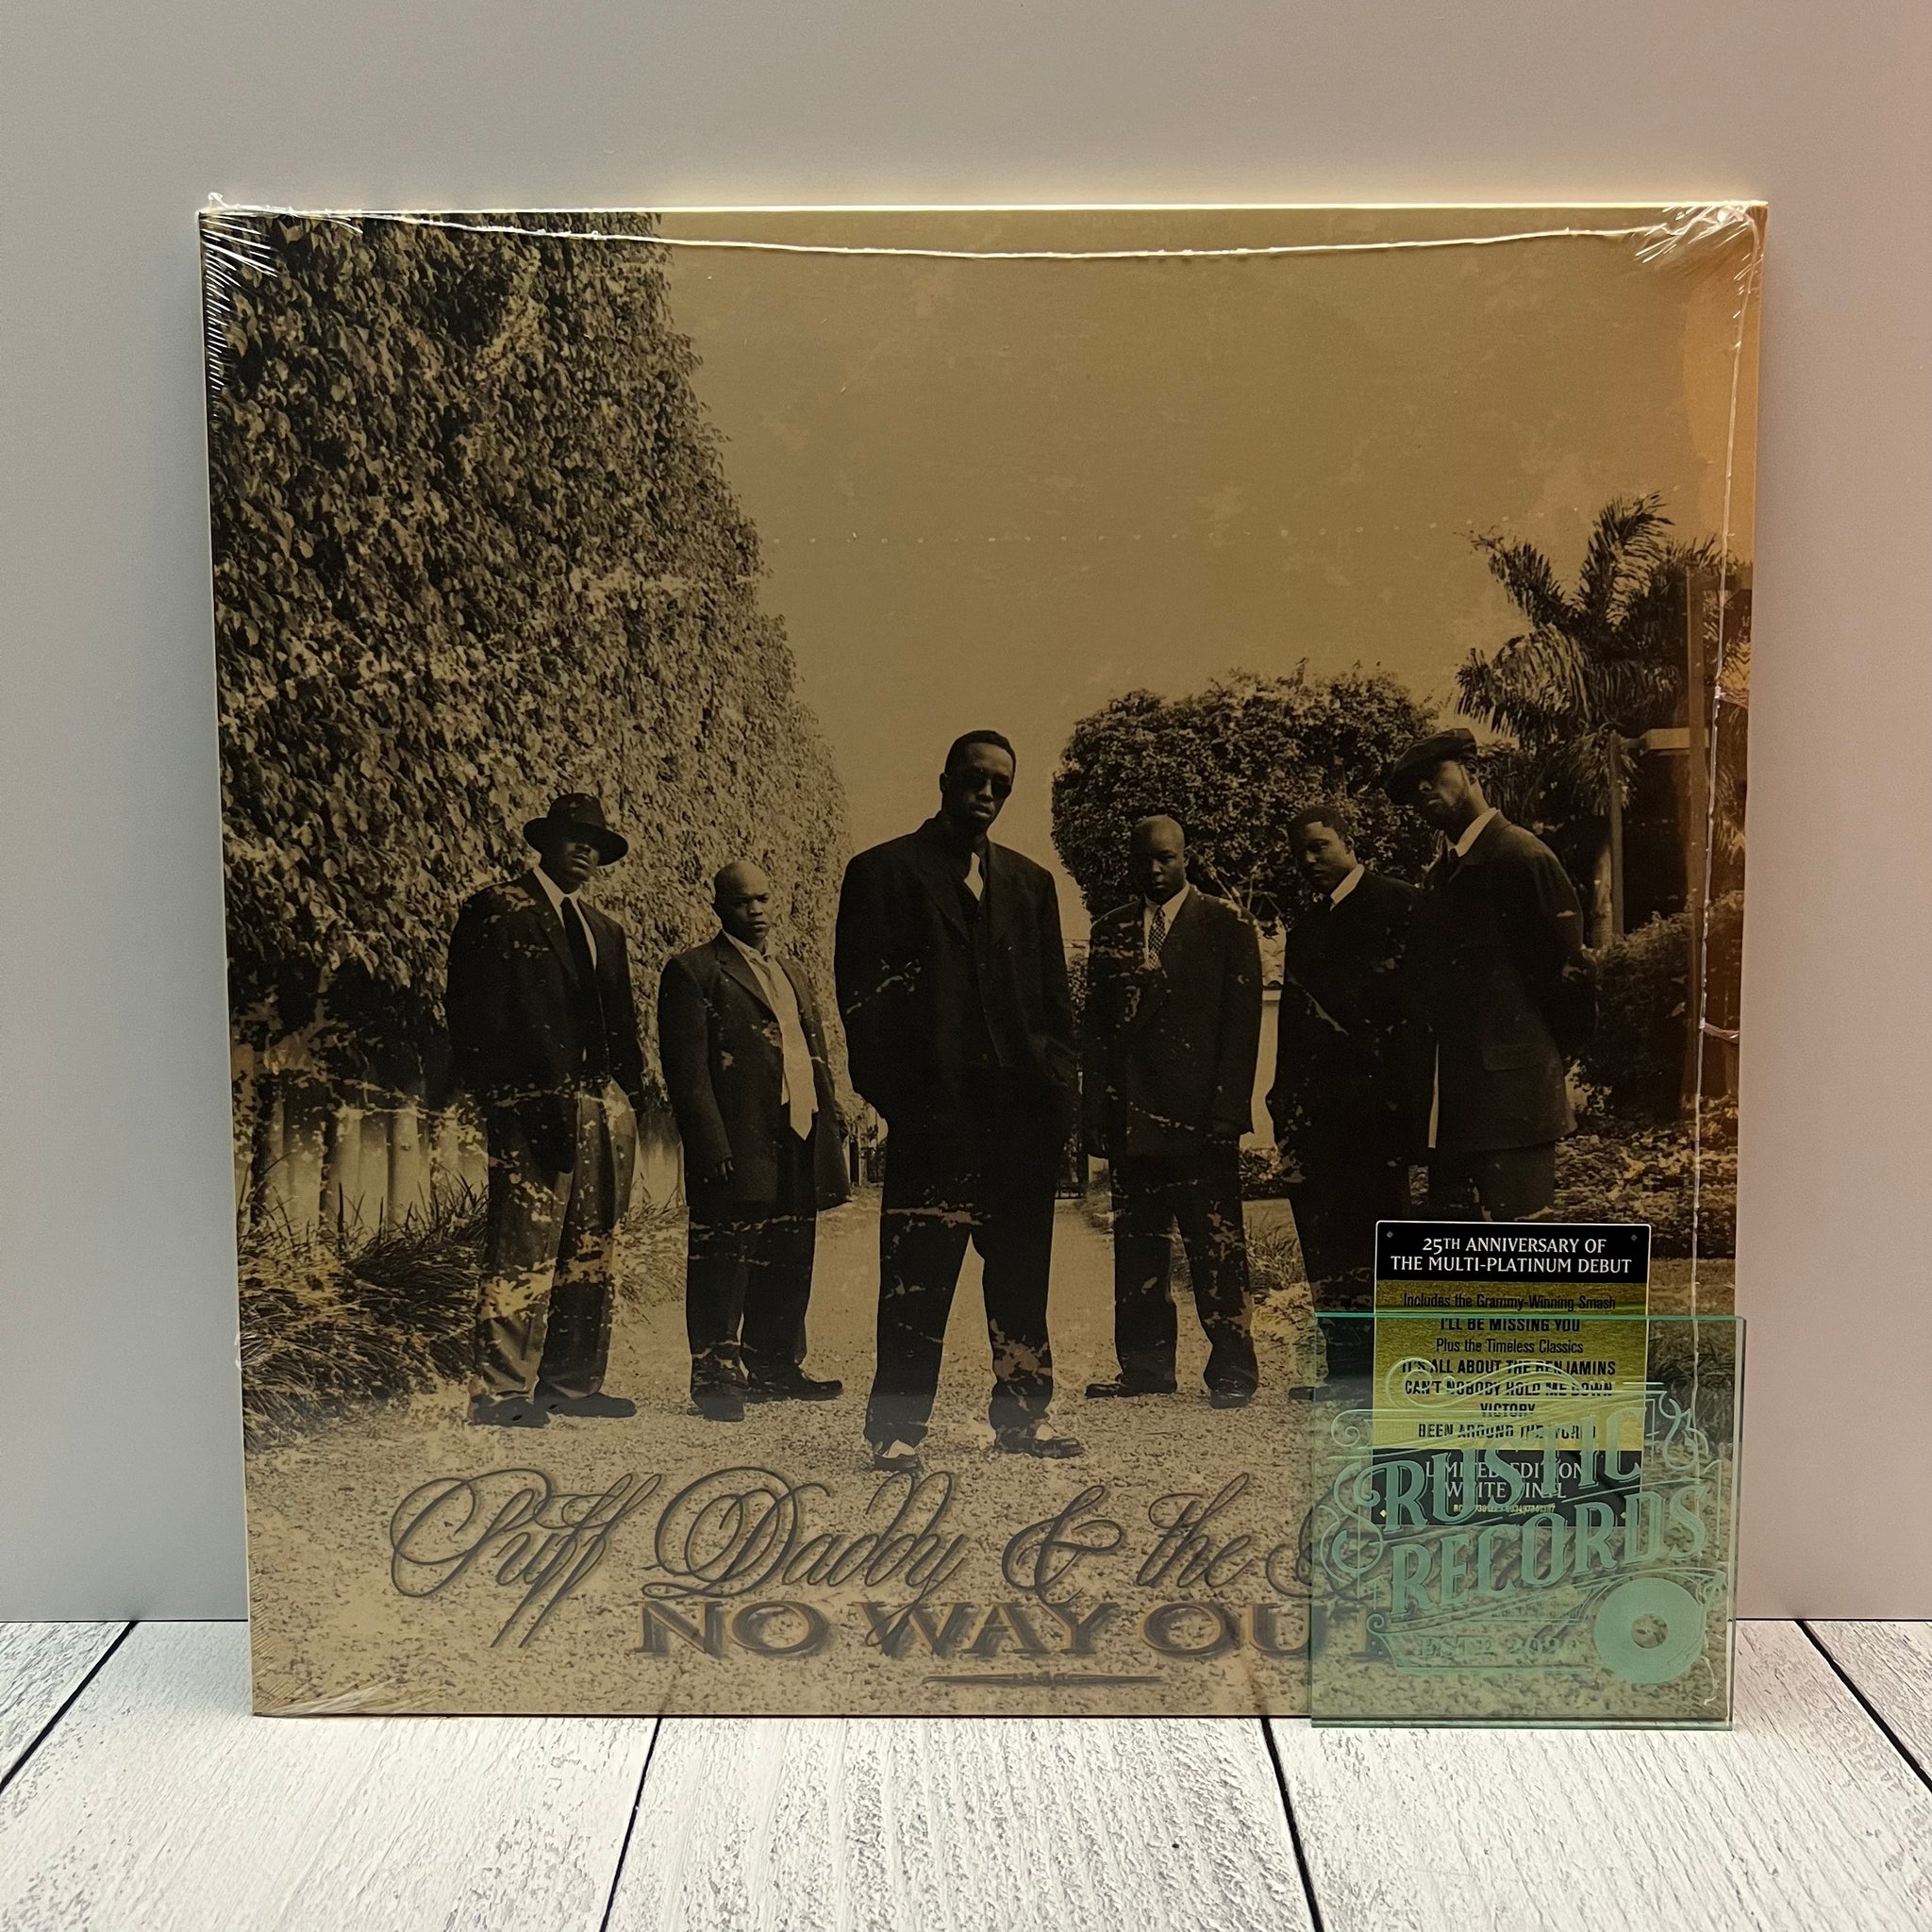 Puff Daddy & The Family - No Way Out 25th Anniversary (White Vinyl)